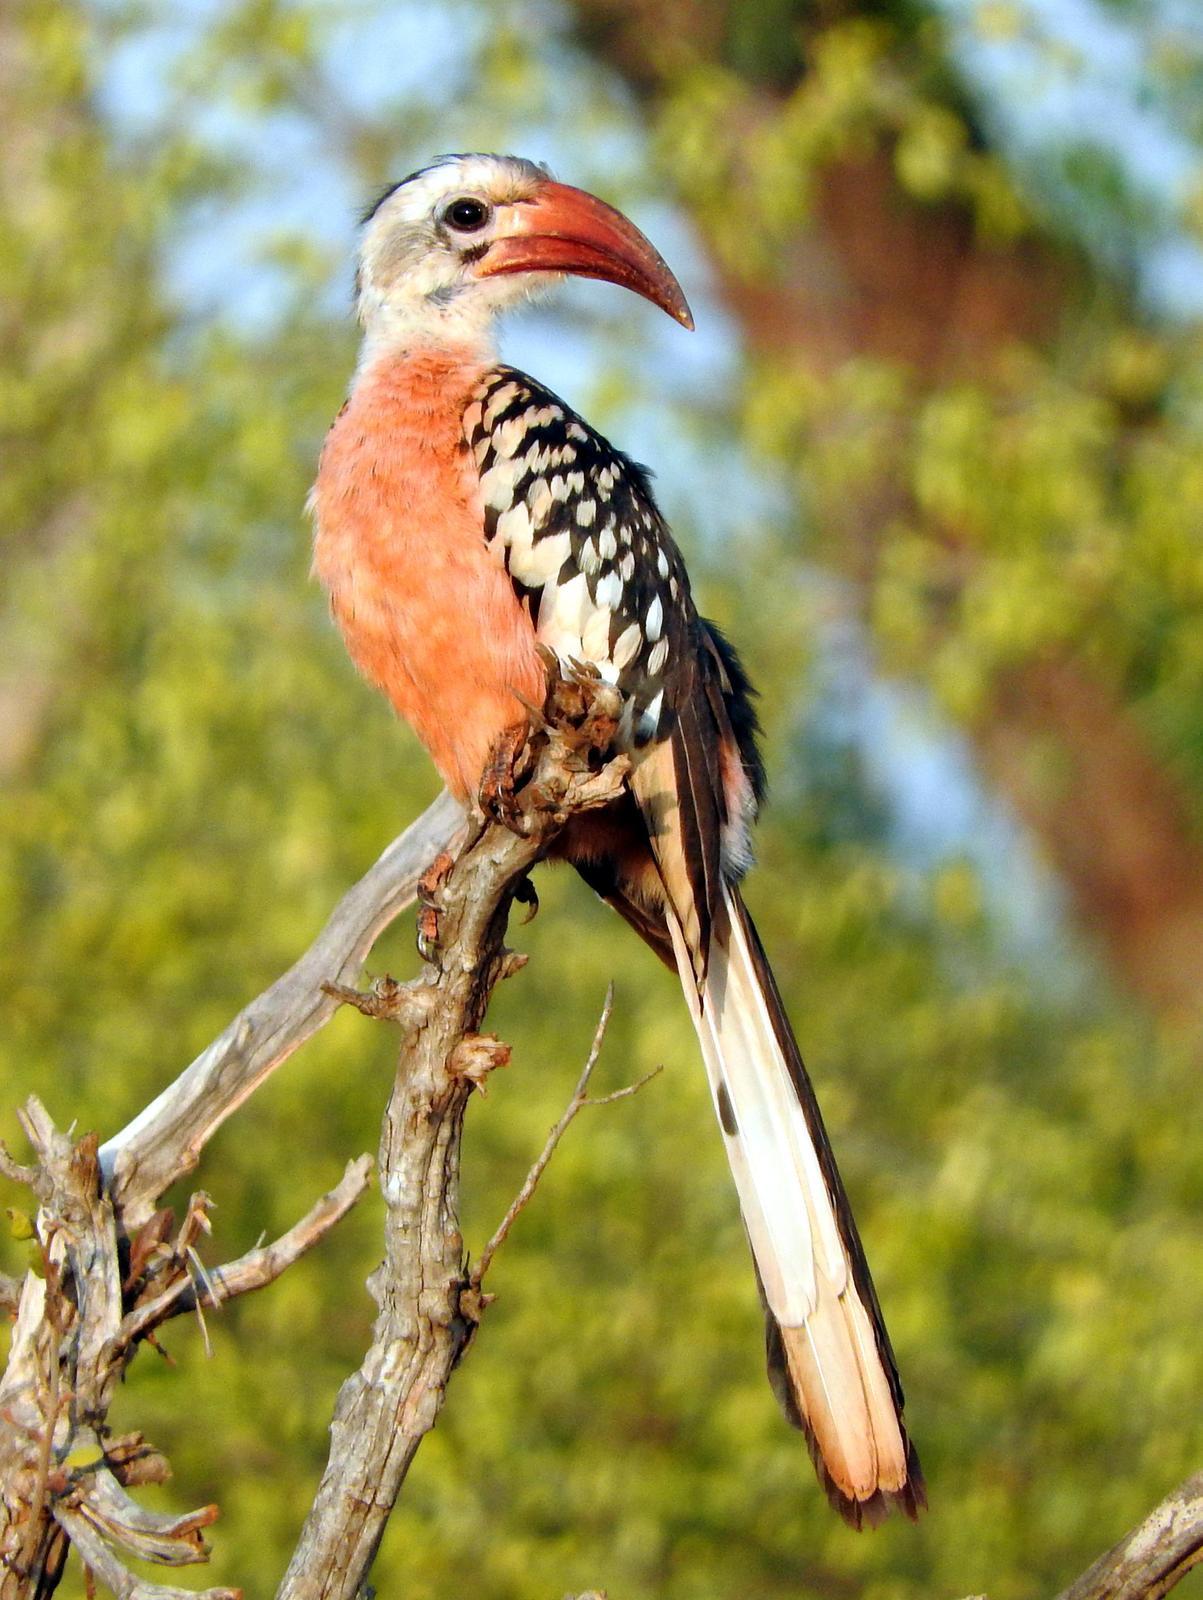 Northern Red-billed Hornbill Photo by Todd A. Watkins